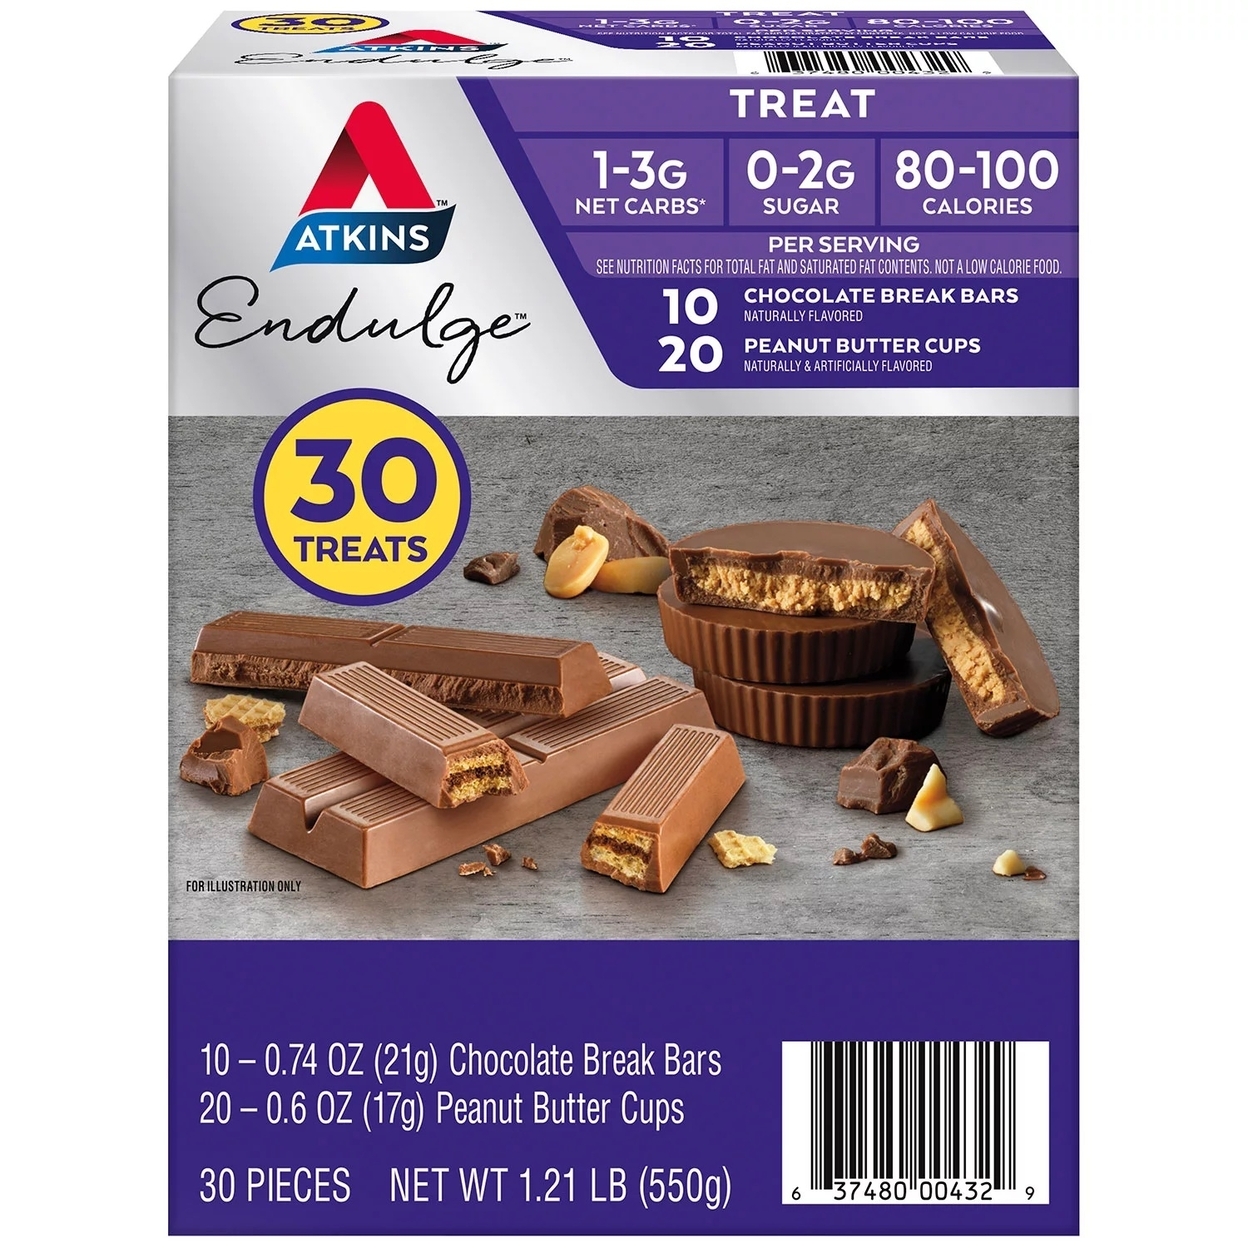 Atkins Endulge Peanut Butter Cup Chocolate Break Bar Variety Pack (30 Count)